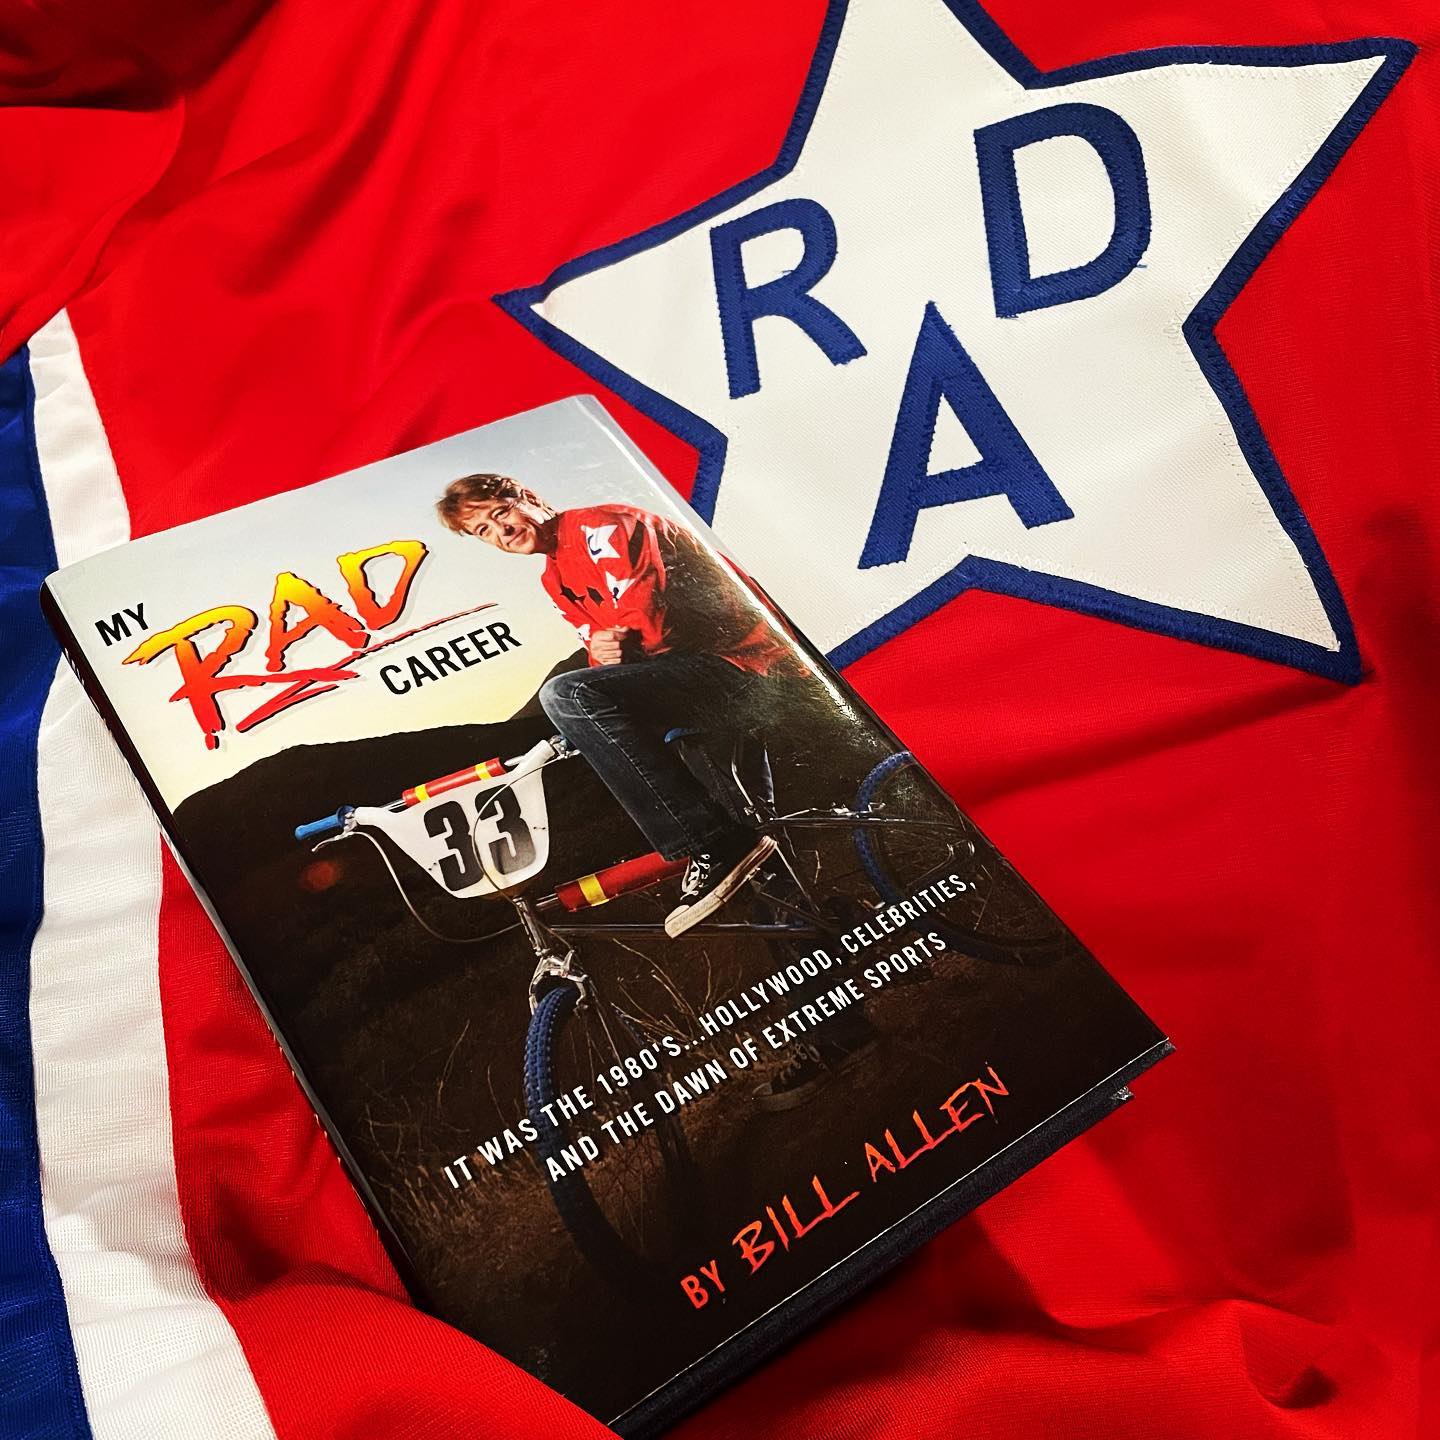 Looking forward to the RAD weekend ahead because the legendary @billslimallen is heading to town! 🔥 His autobiography, “My Rad Career,” is a great read! Highly recommended! #rad #bmx #billallen #crujones #movies